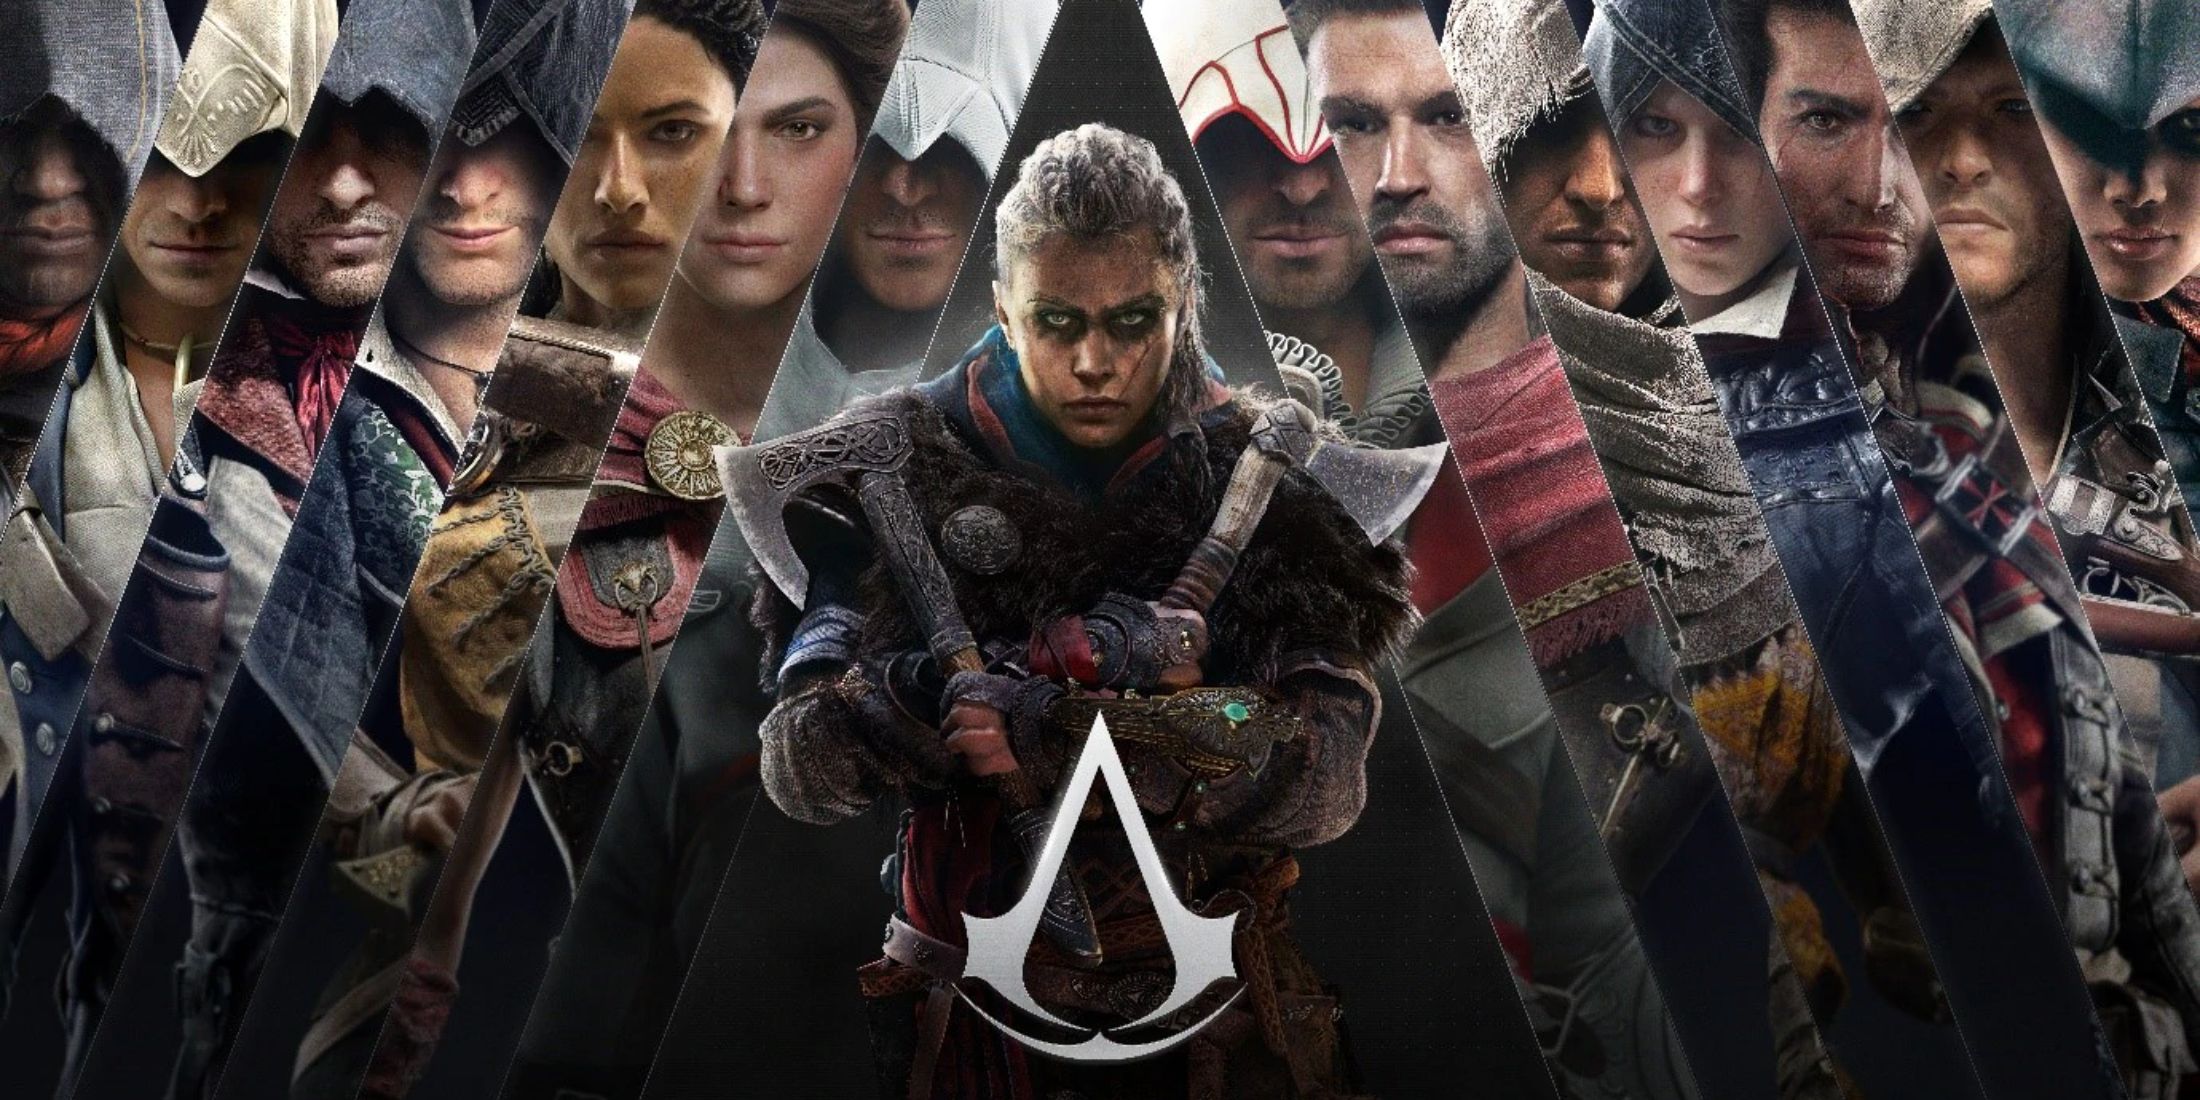 Ubisoft has confirmed that it is considering remaking old Assassin's Creed games.